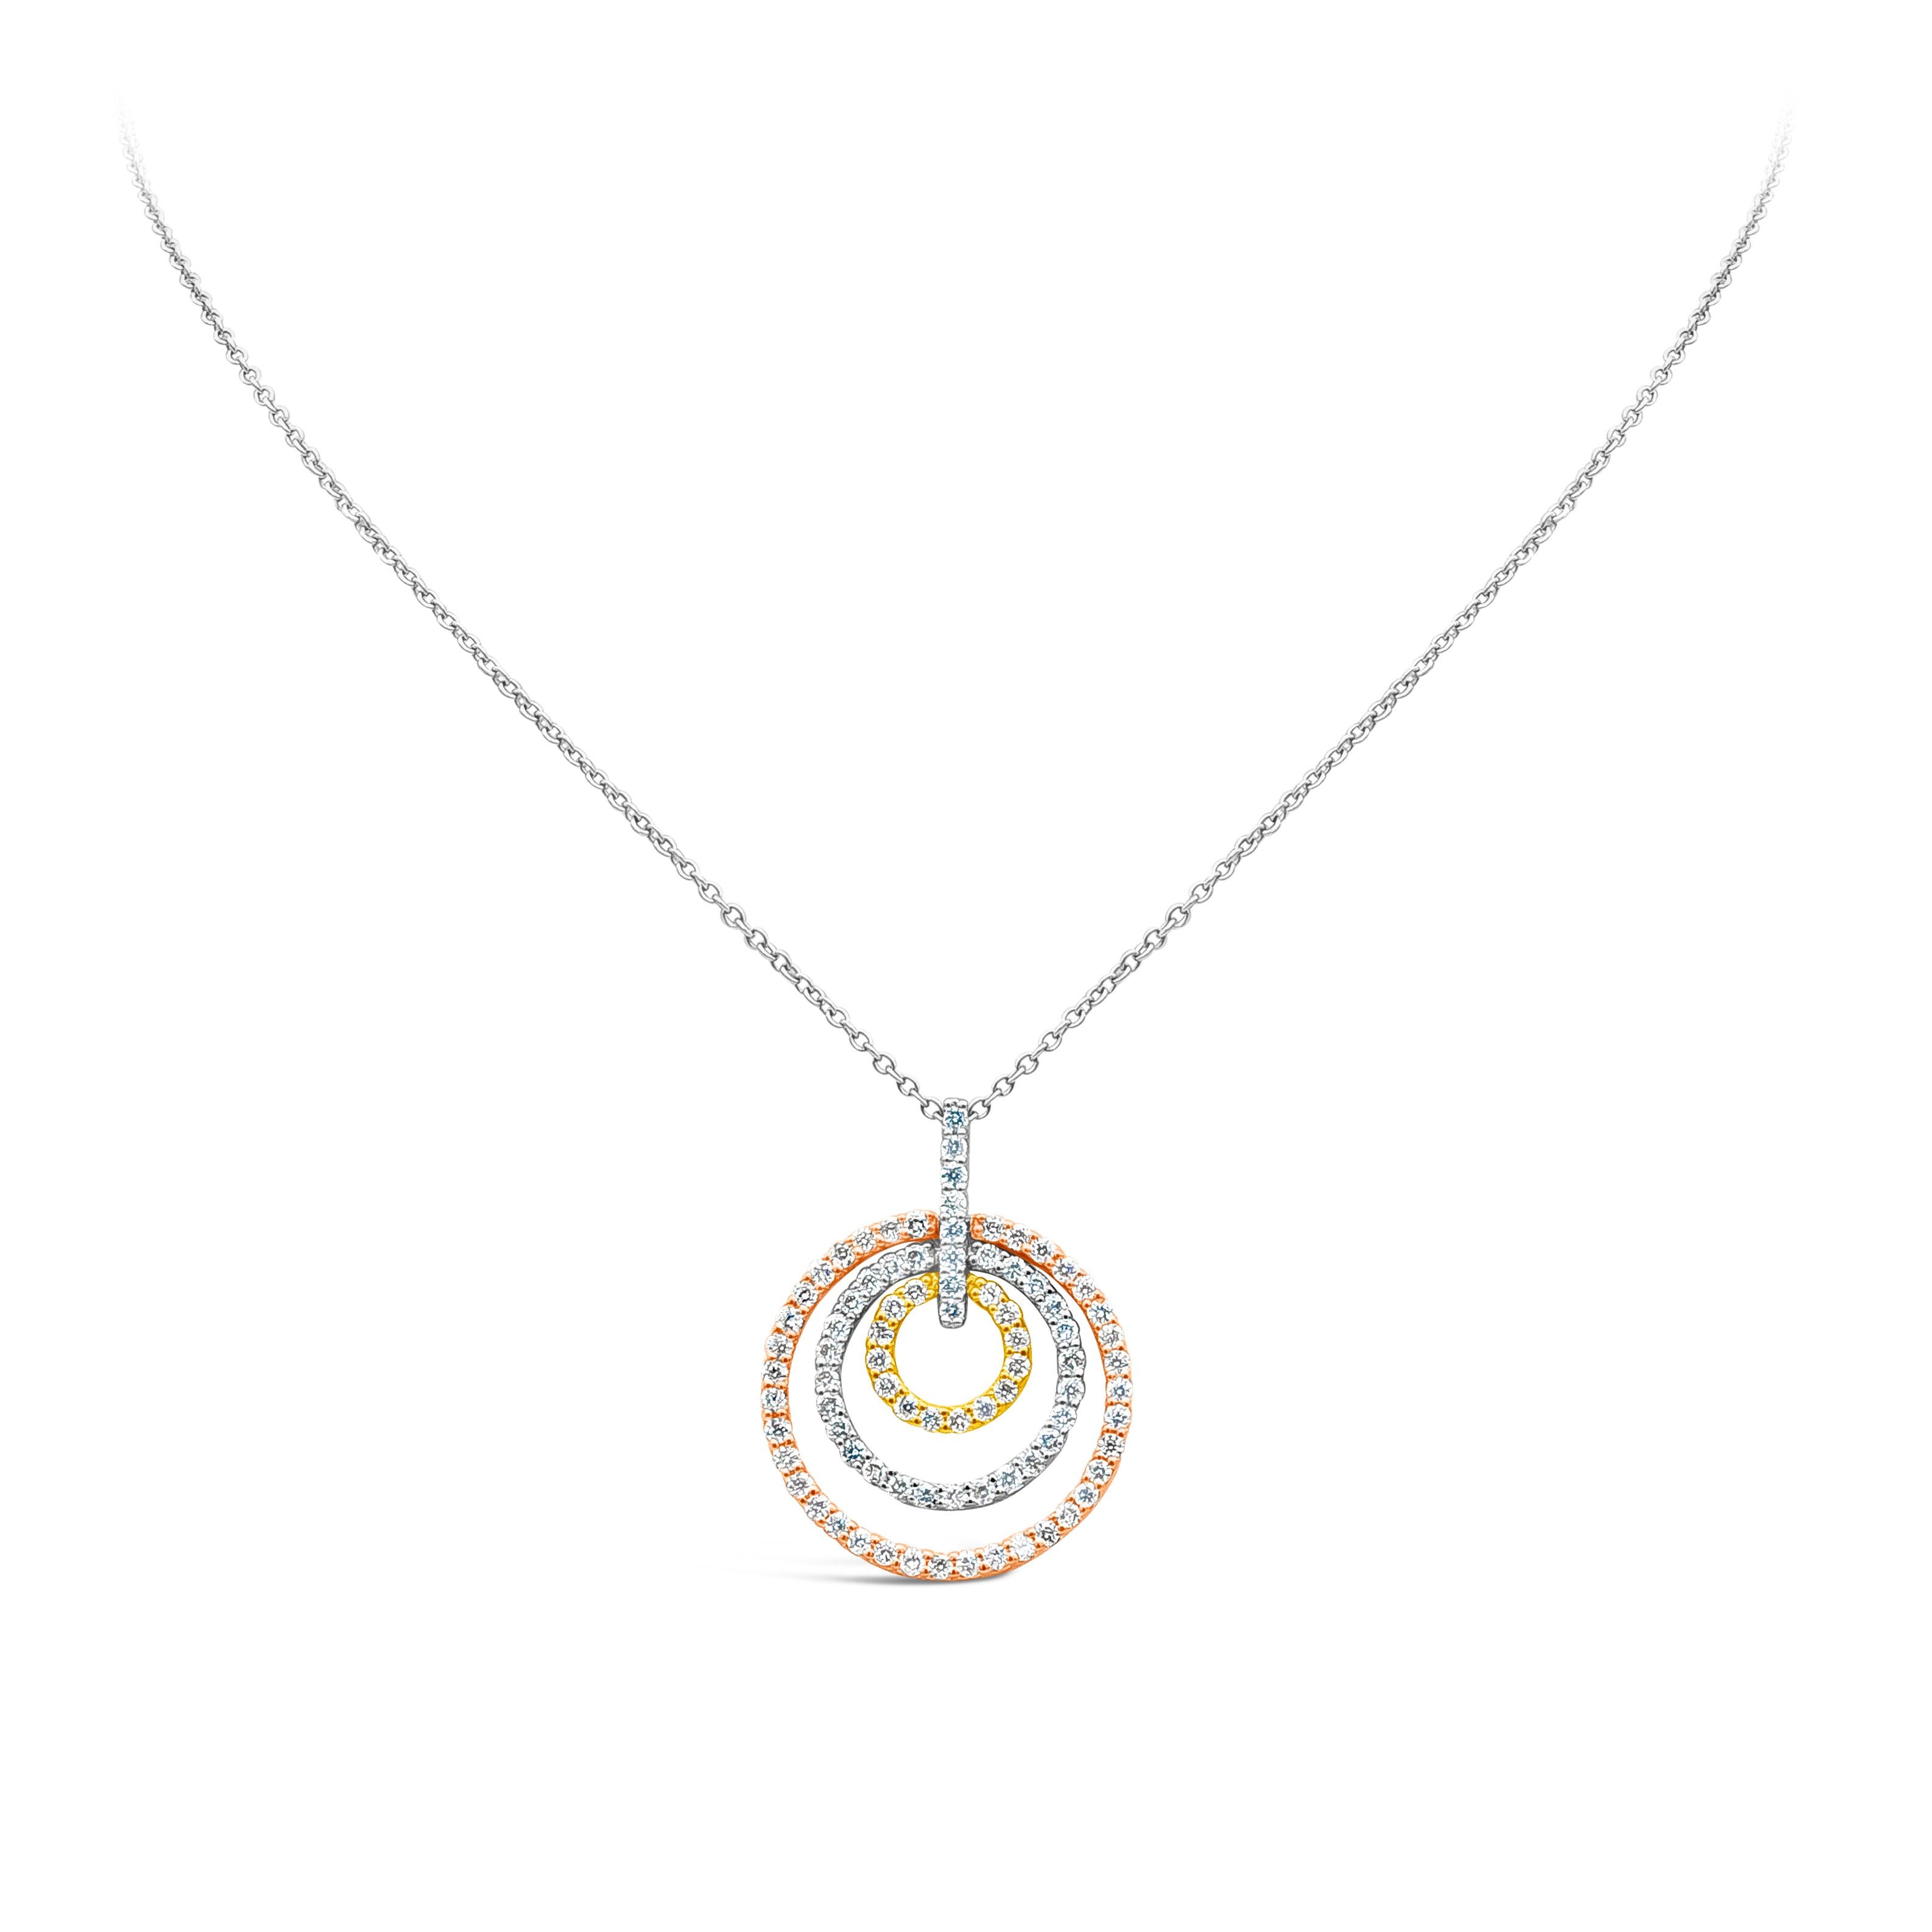 A chic and exquisite triple loop pendant necklace showcasing 0.77 carat total, embellished by 85 pieces of brilliant round diamonds. Set in a open-work circular design, F-G  color and VS-SI in clarity. Finely made with 18k white gold, yellow gold